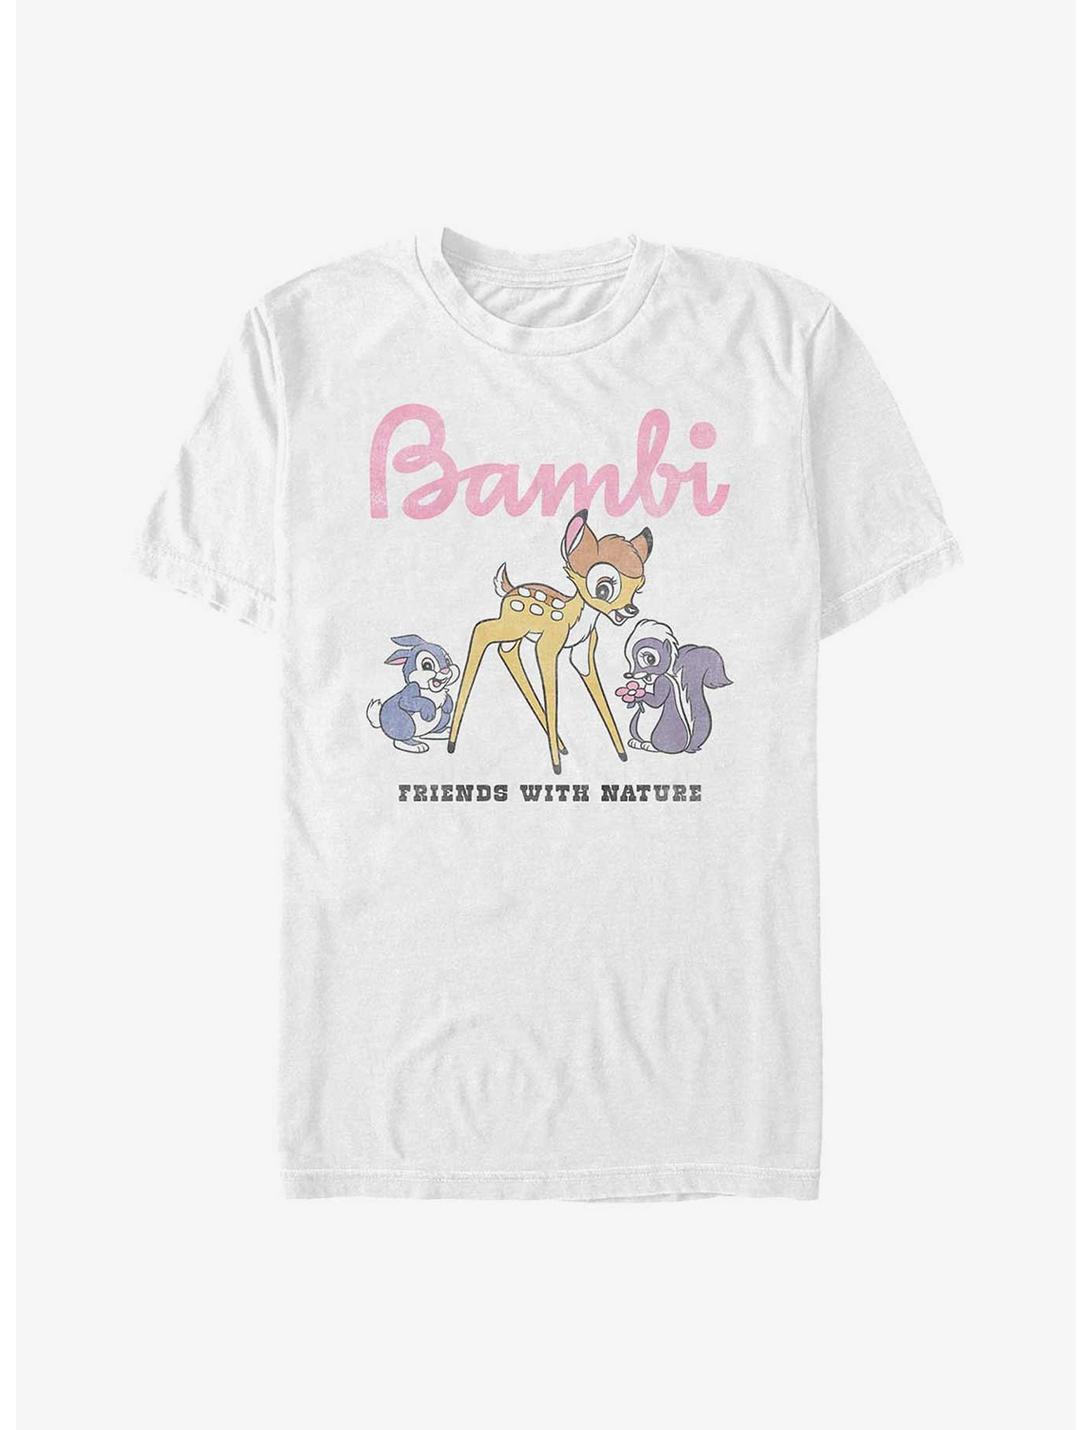 Disney Bambi Friends With Nature T-Shirt, WHITE, hi-res